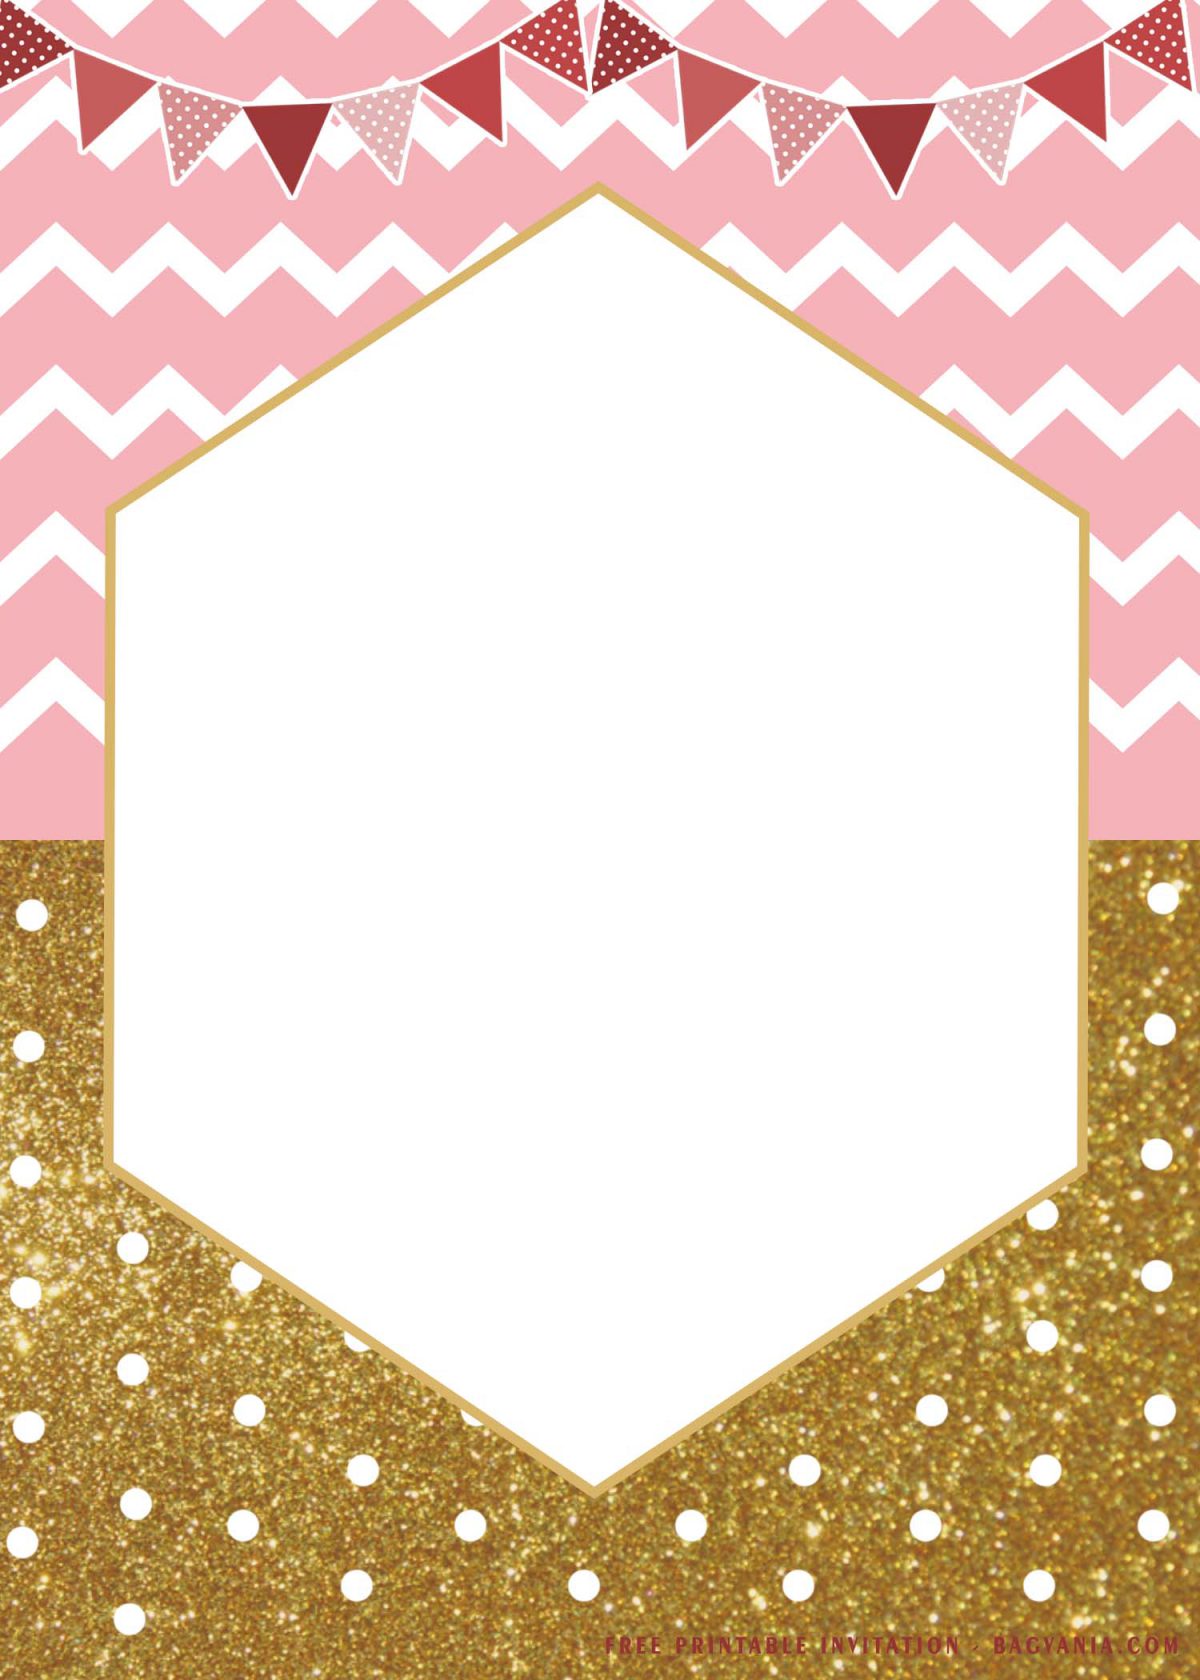 Free Printable Gold And Pink Birthday Invitation Templates With Gold Sprinkles